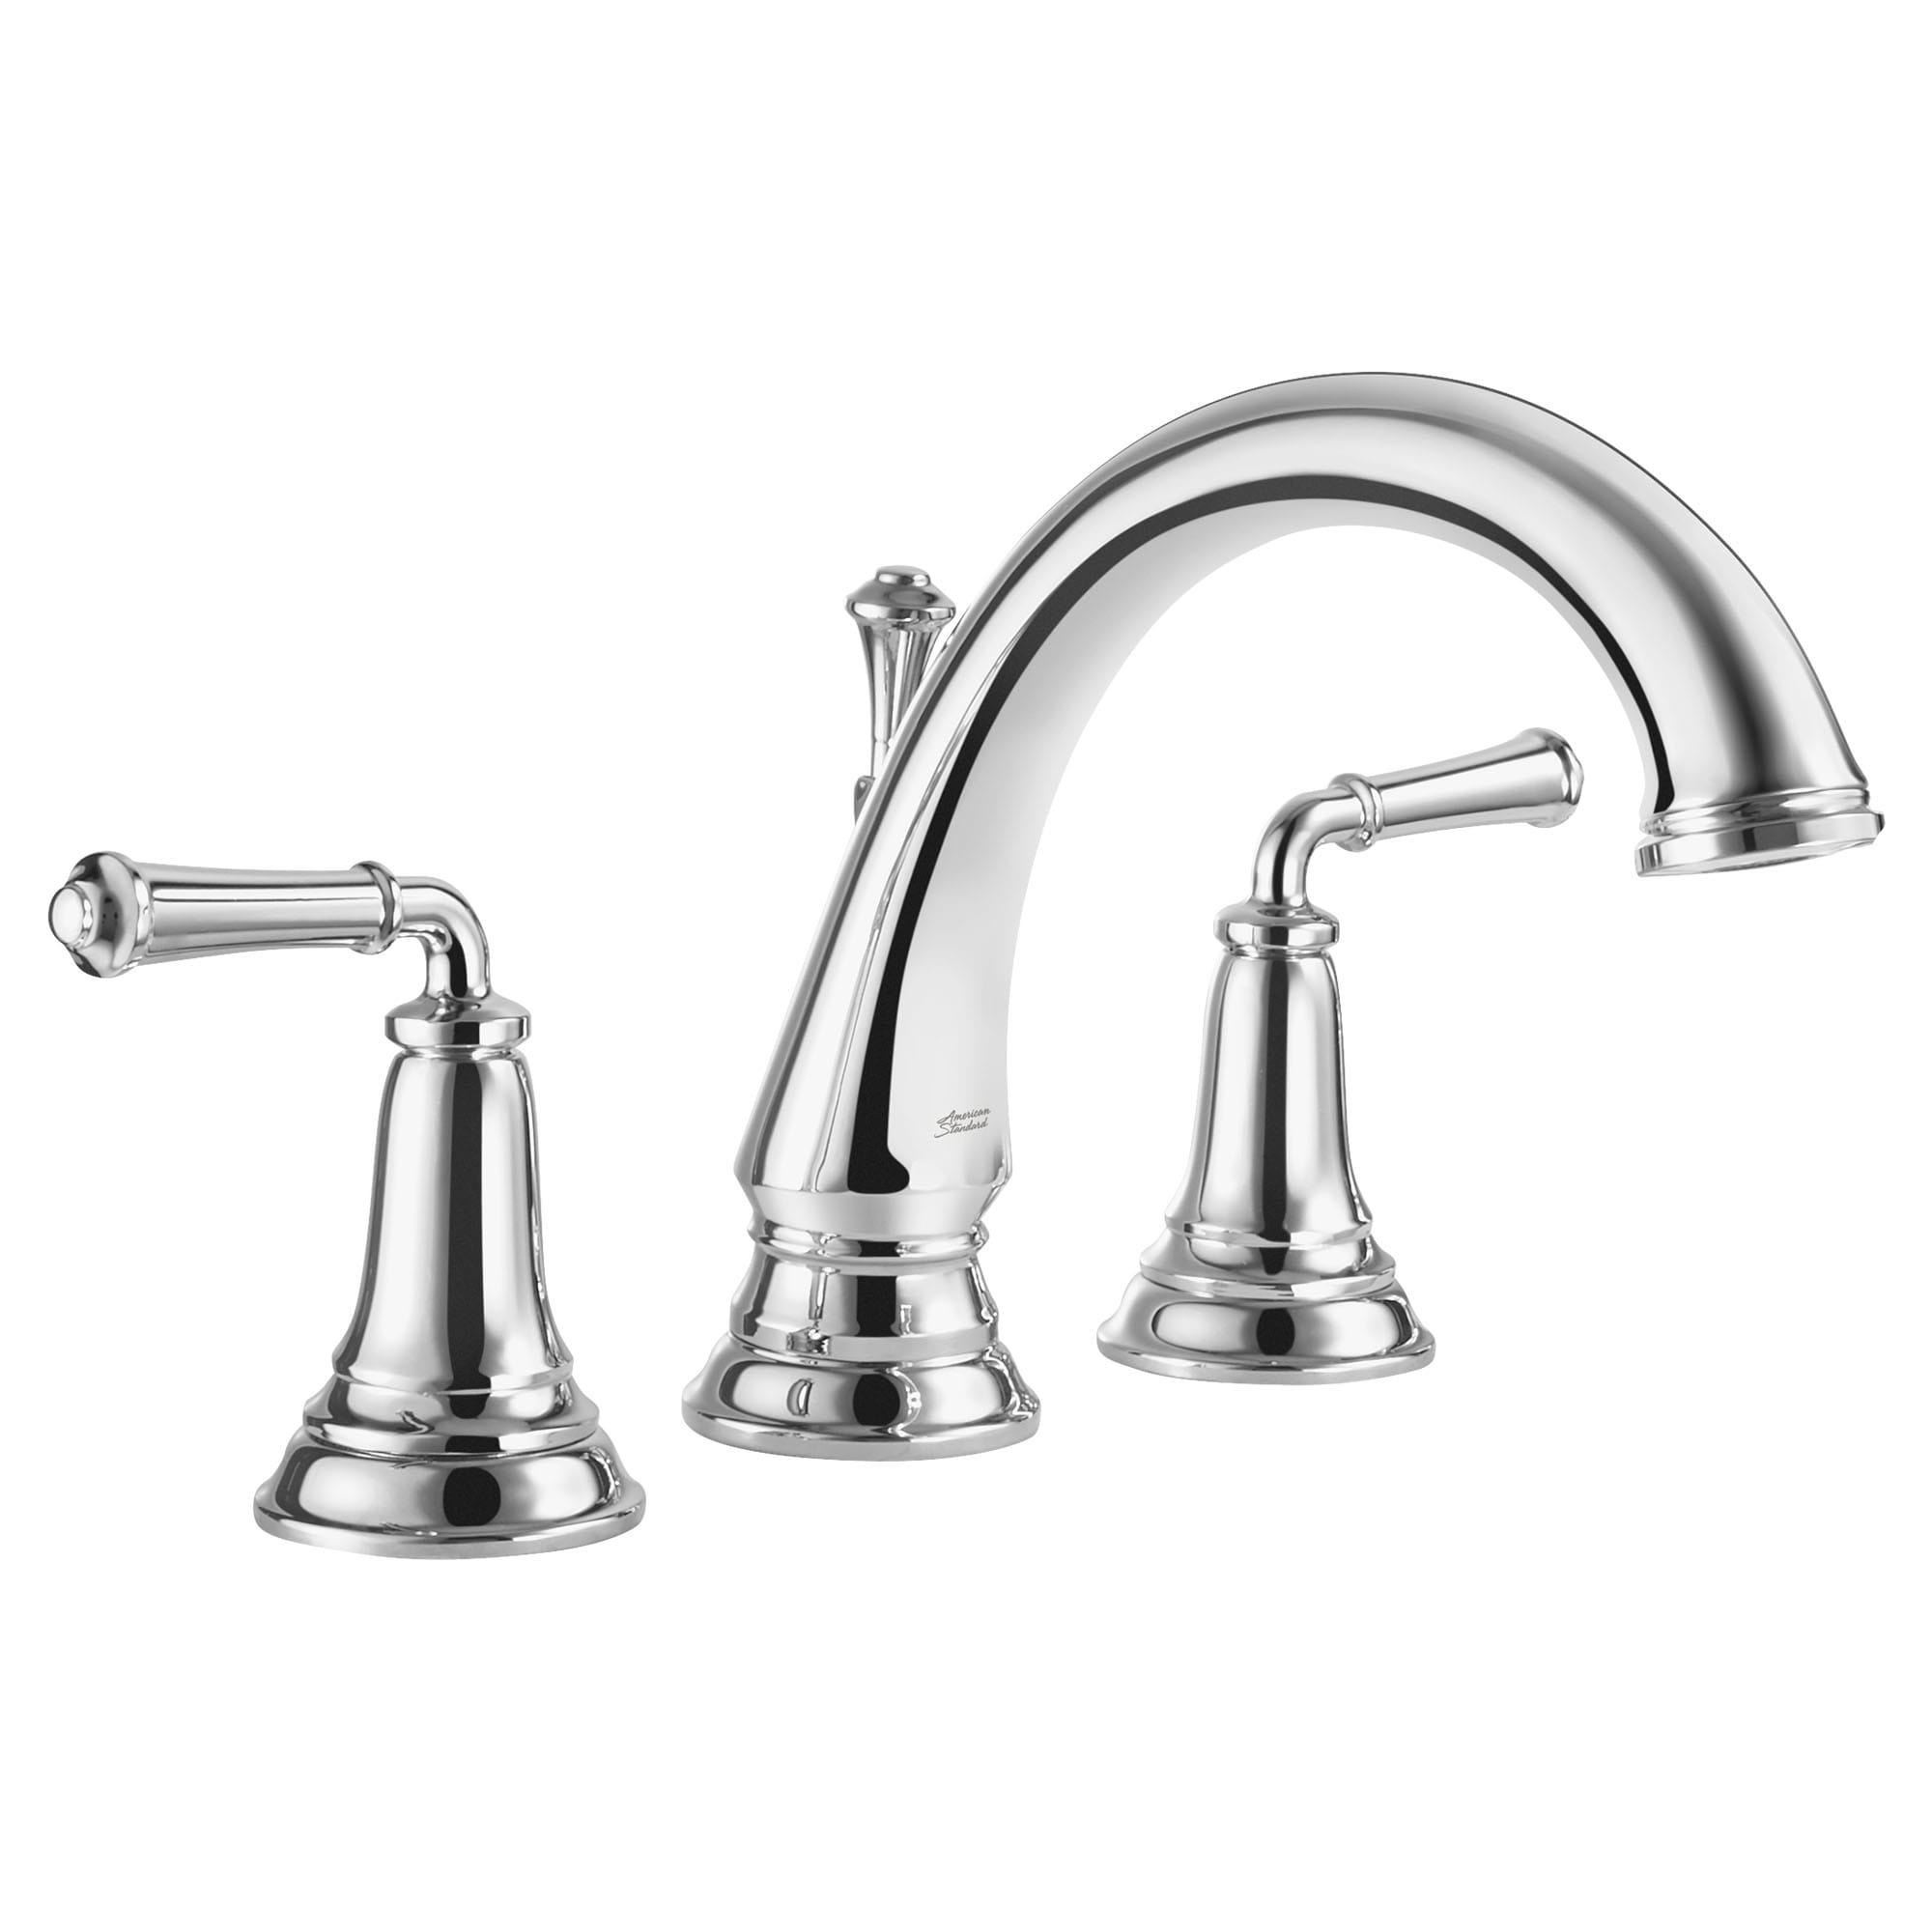 Delancey Bathtub Faucet With Lever Handles for Flash Rough In Valve CHROME